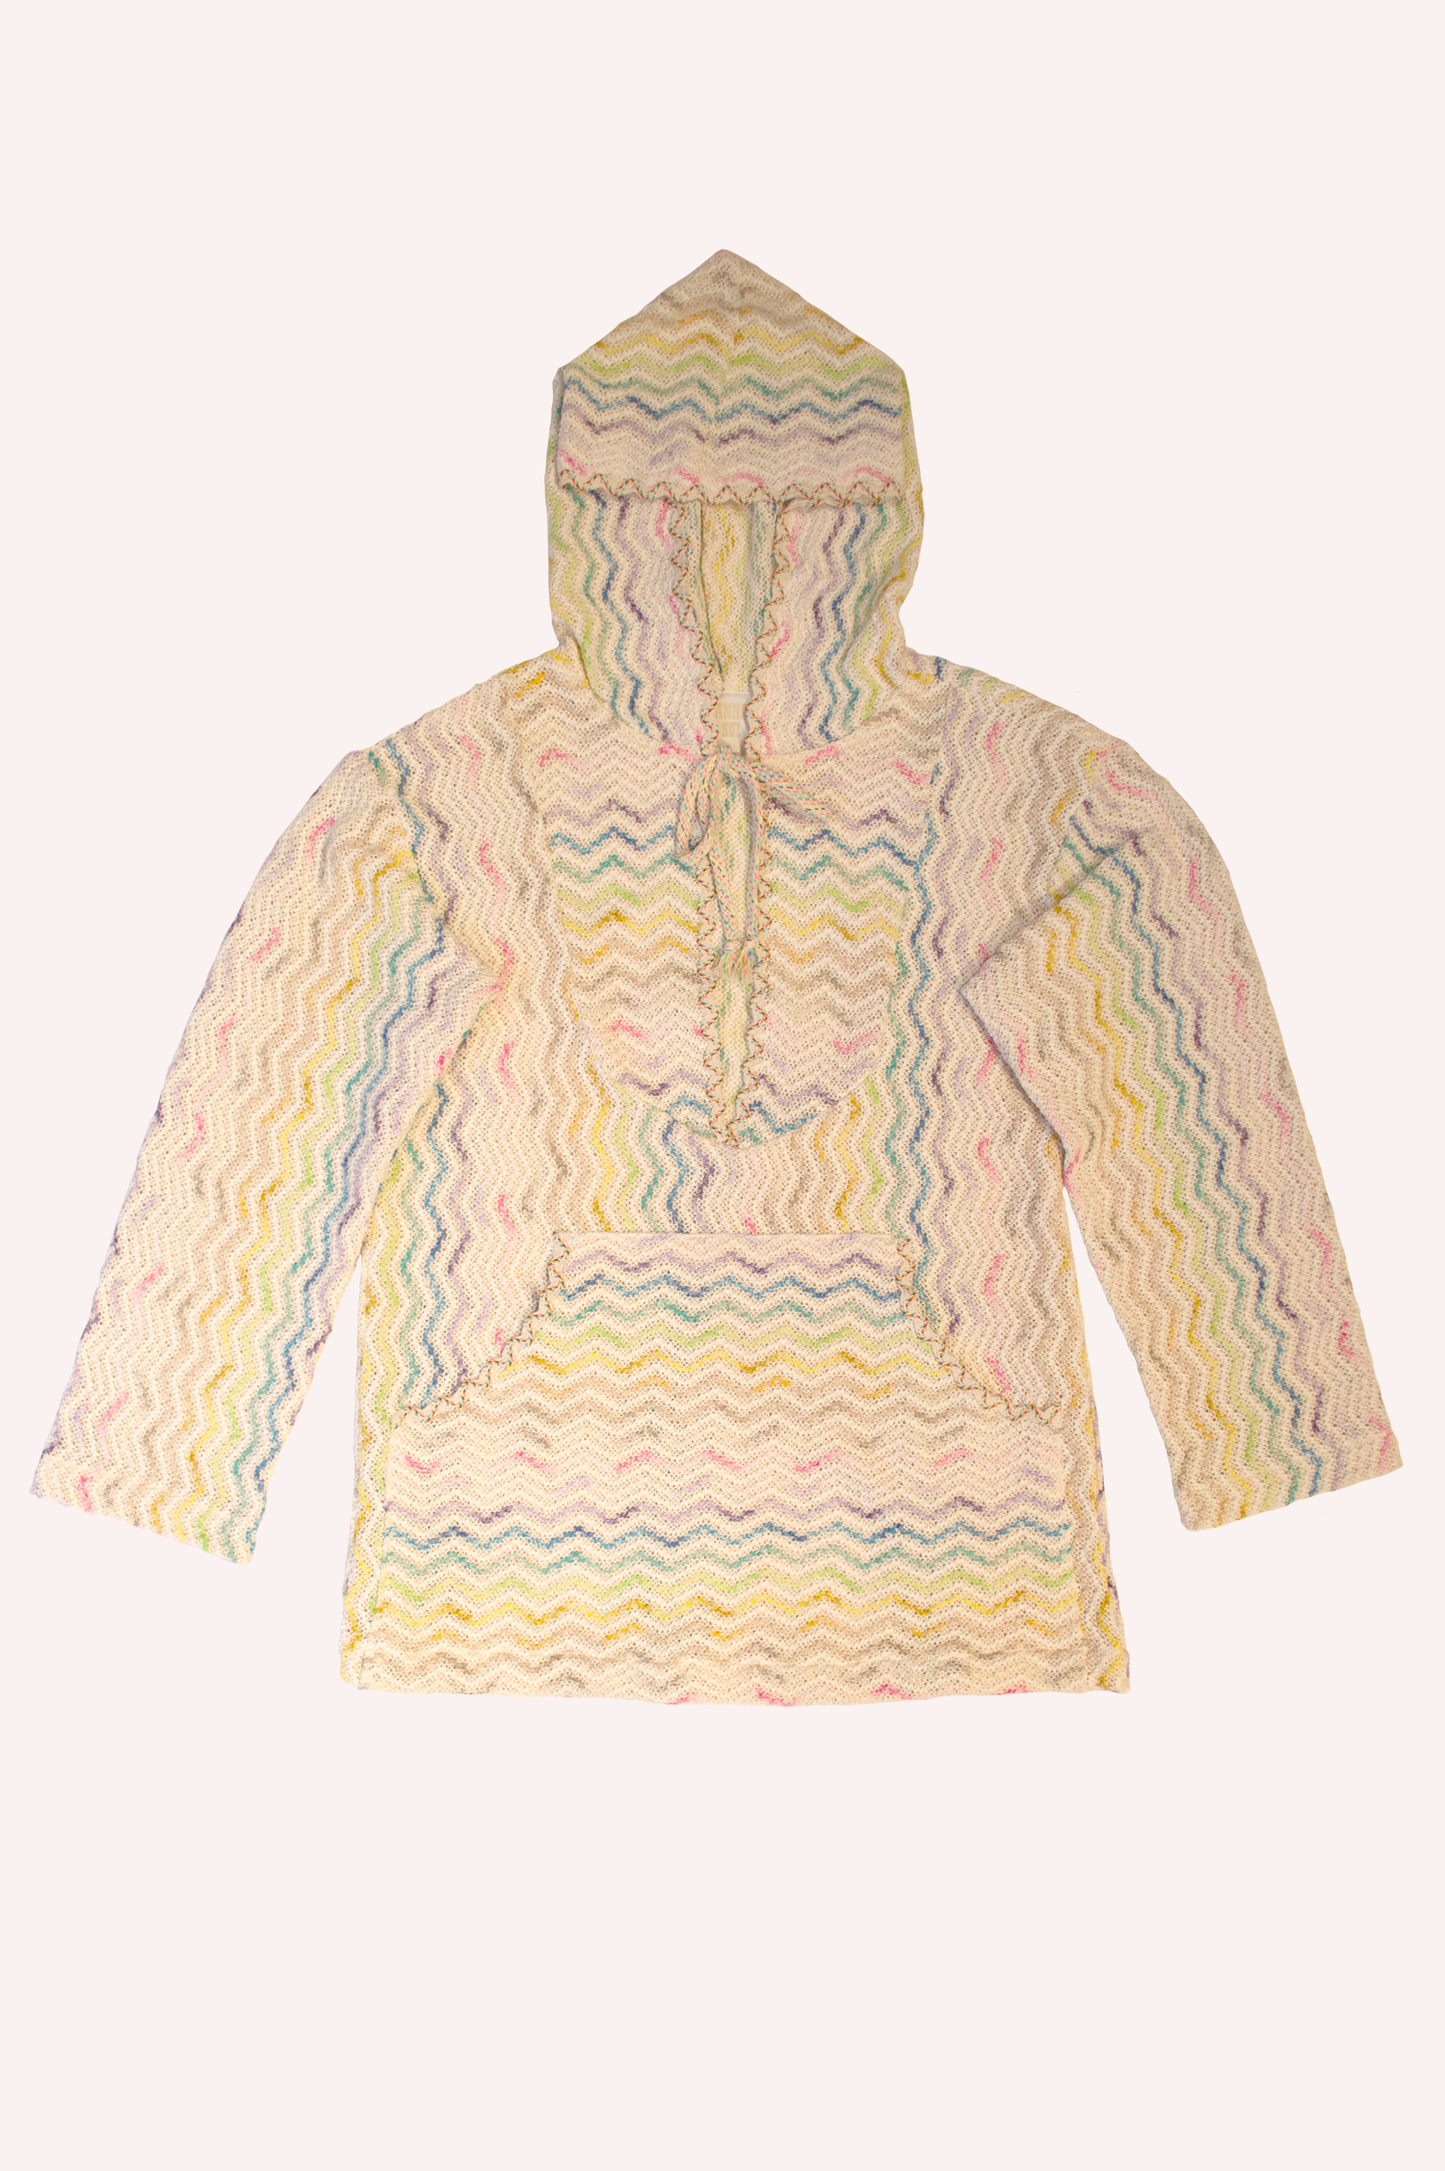 Hoodie, off white with red, blue, yellow and green insert, deep collar cut with a lace, 2-pockets